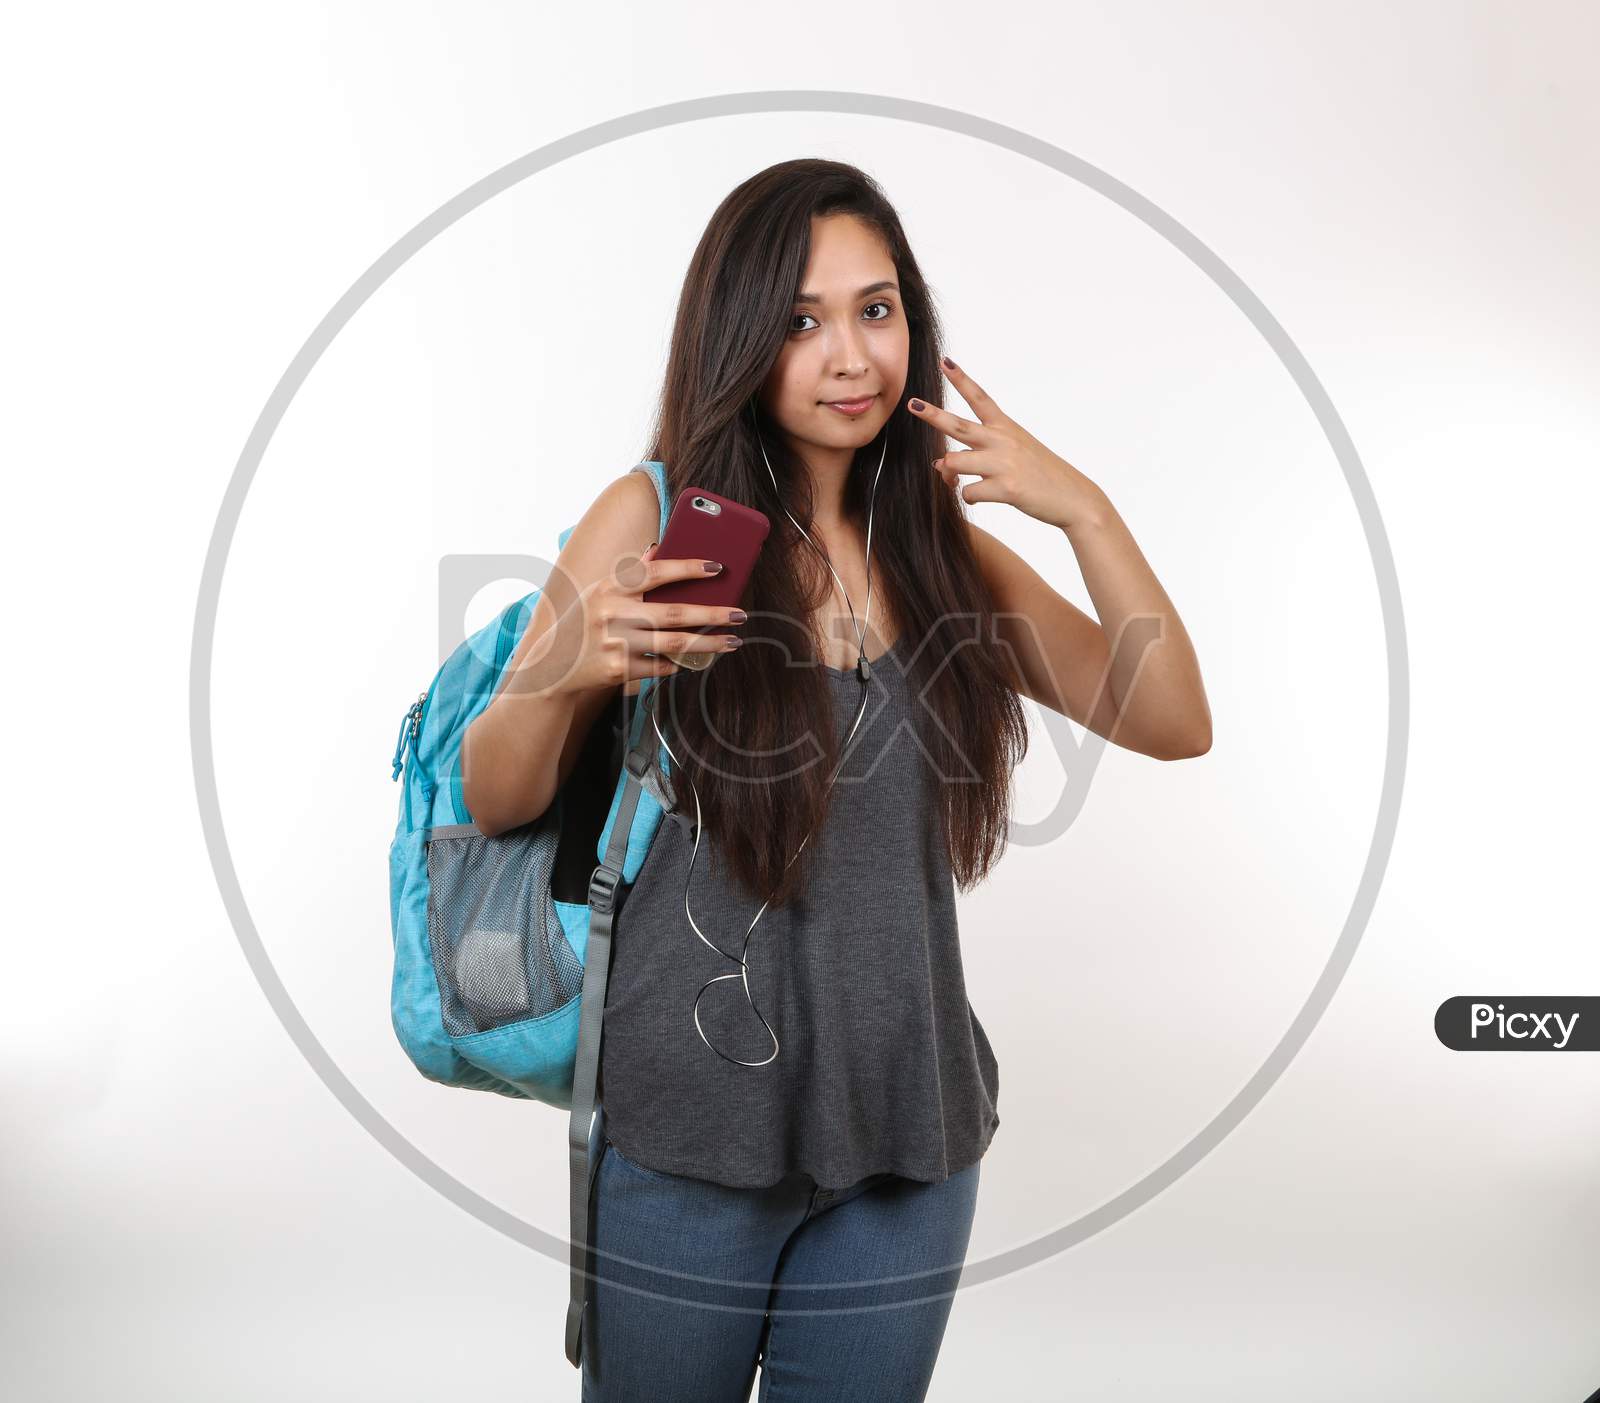 A Young Hispanic Student Wearing A Blue Backpack And Earphones, Holds Her Phone And Holds Up The Peace Sign With Her Hand.